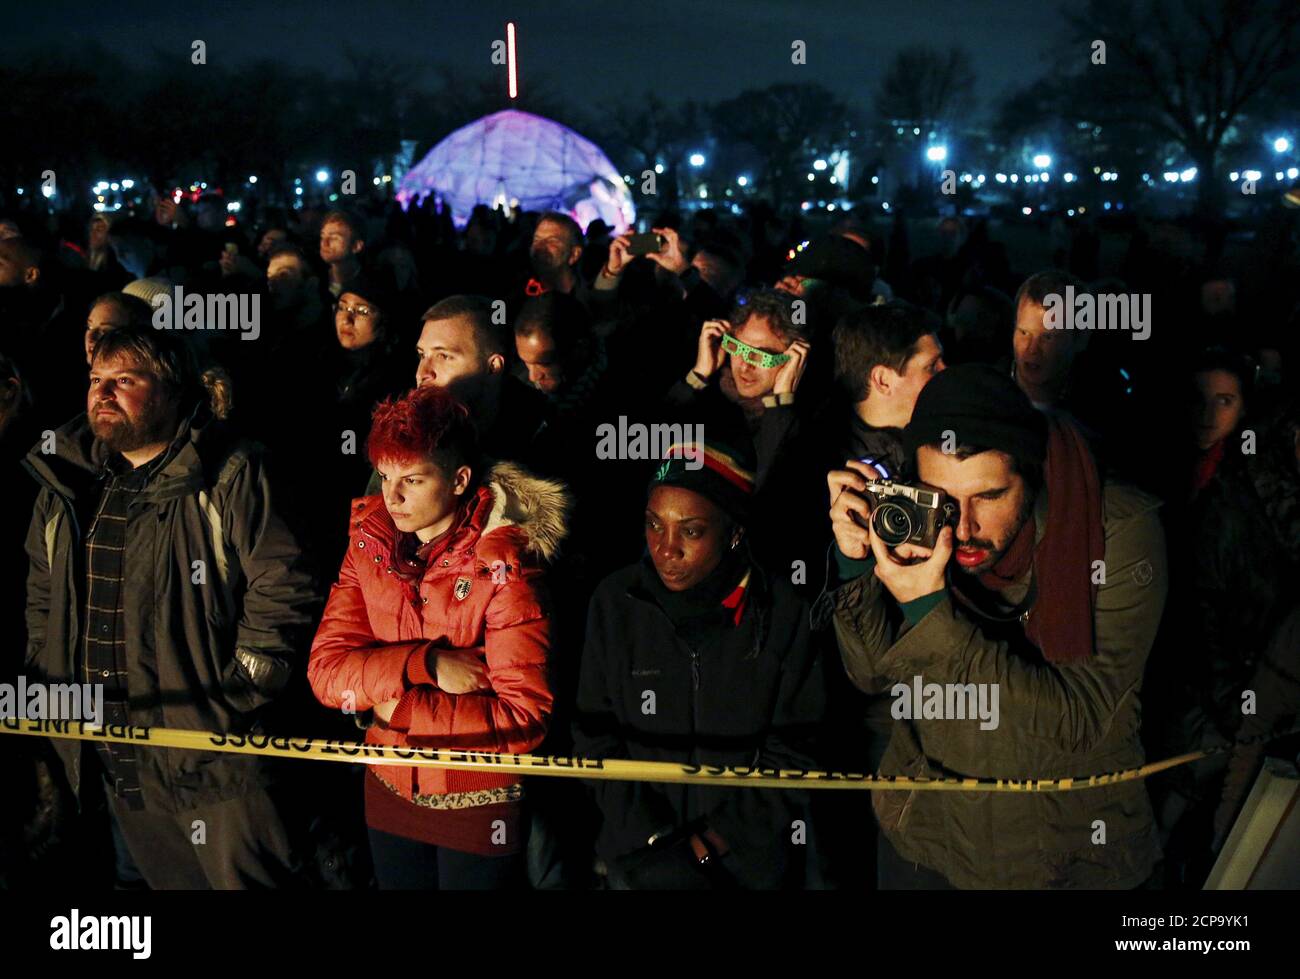 A crowd watches as an interactive art installation created by artist Michael Verdon called the “Temple of Essence” and dedicated to victims of the 'war on drugs' is burned on the U.S. National Mall in Washington November 22, 2015.  People were encouraged to write personal messages on the temple walls and leave mementos behind inside the interactive art piece, which was the centerpiece of a 48-hour vigil called 'Catharsis on the Mall: A Vigil for Healing the Drug War.'     REUTERS/Jim Bourg Stock Photo